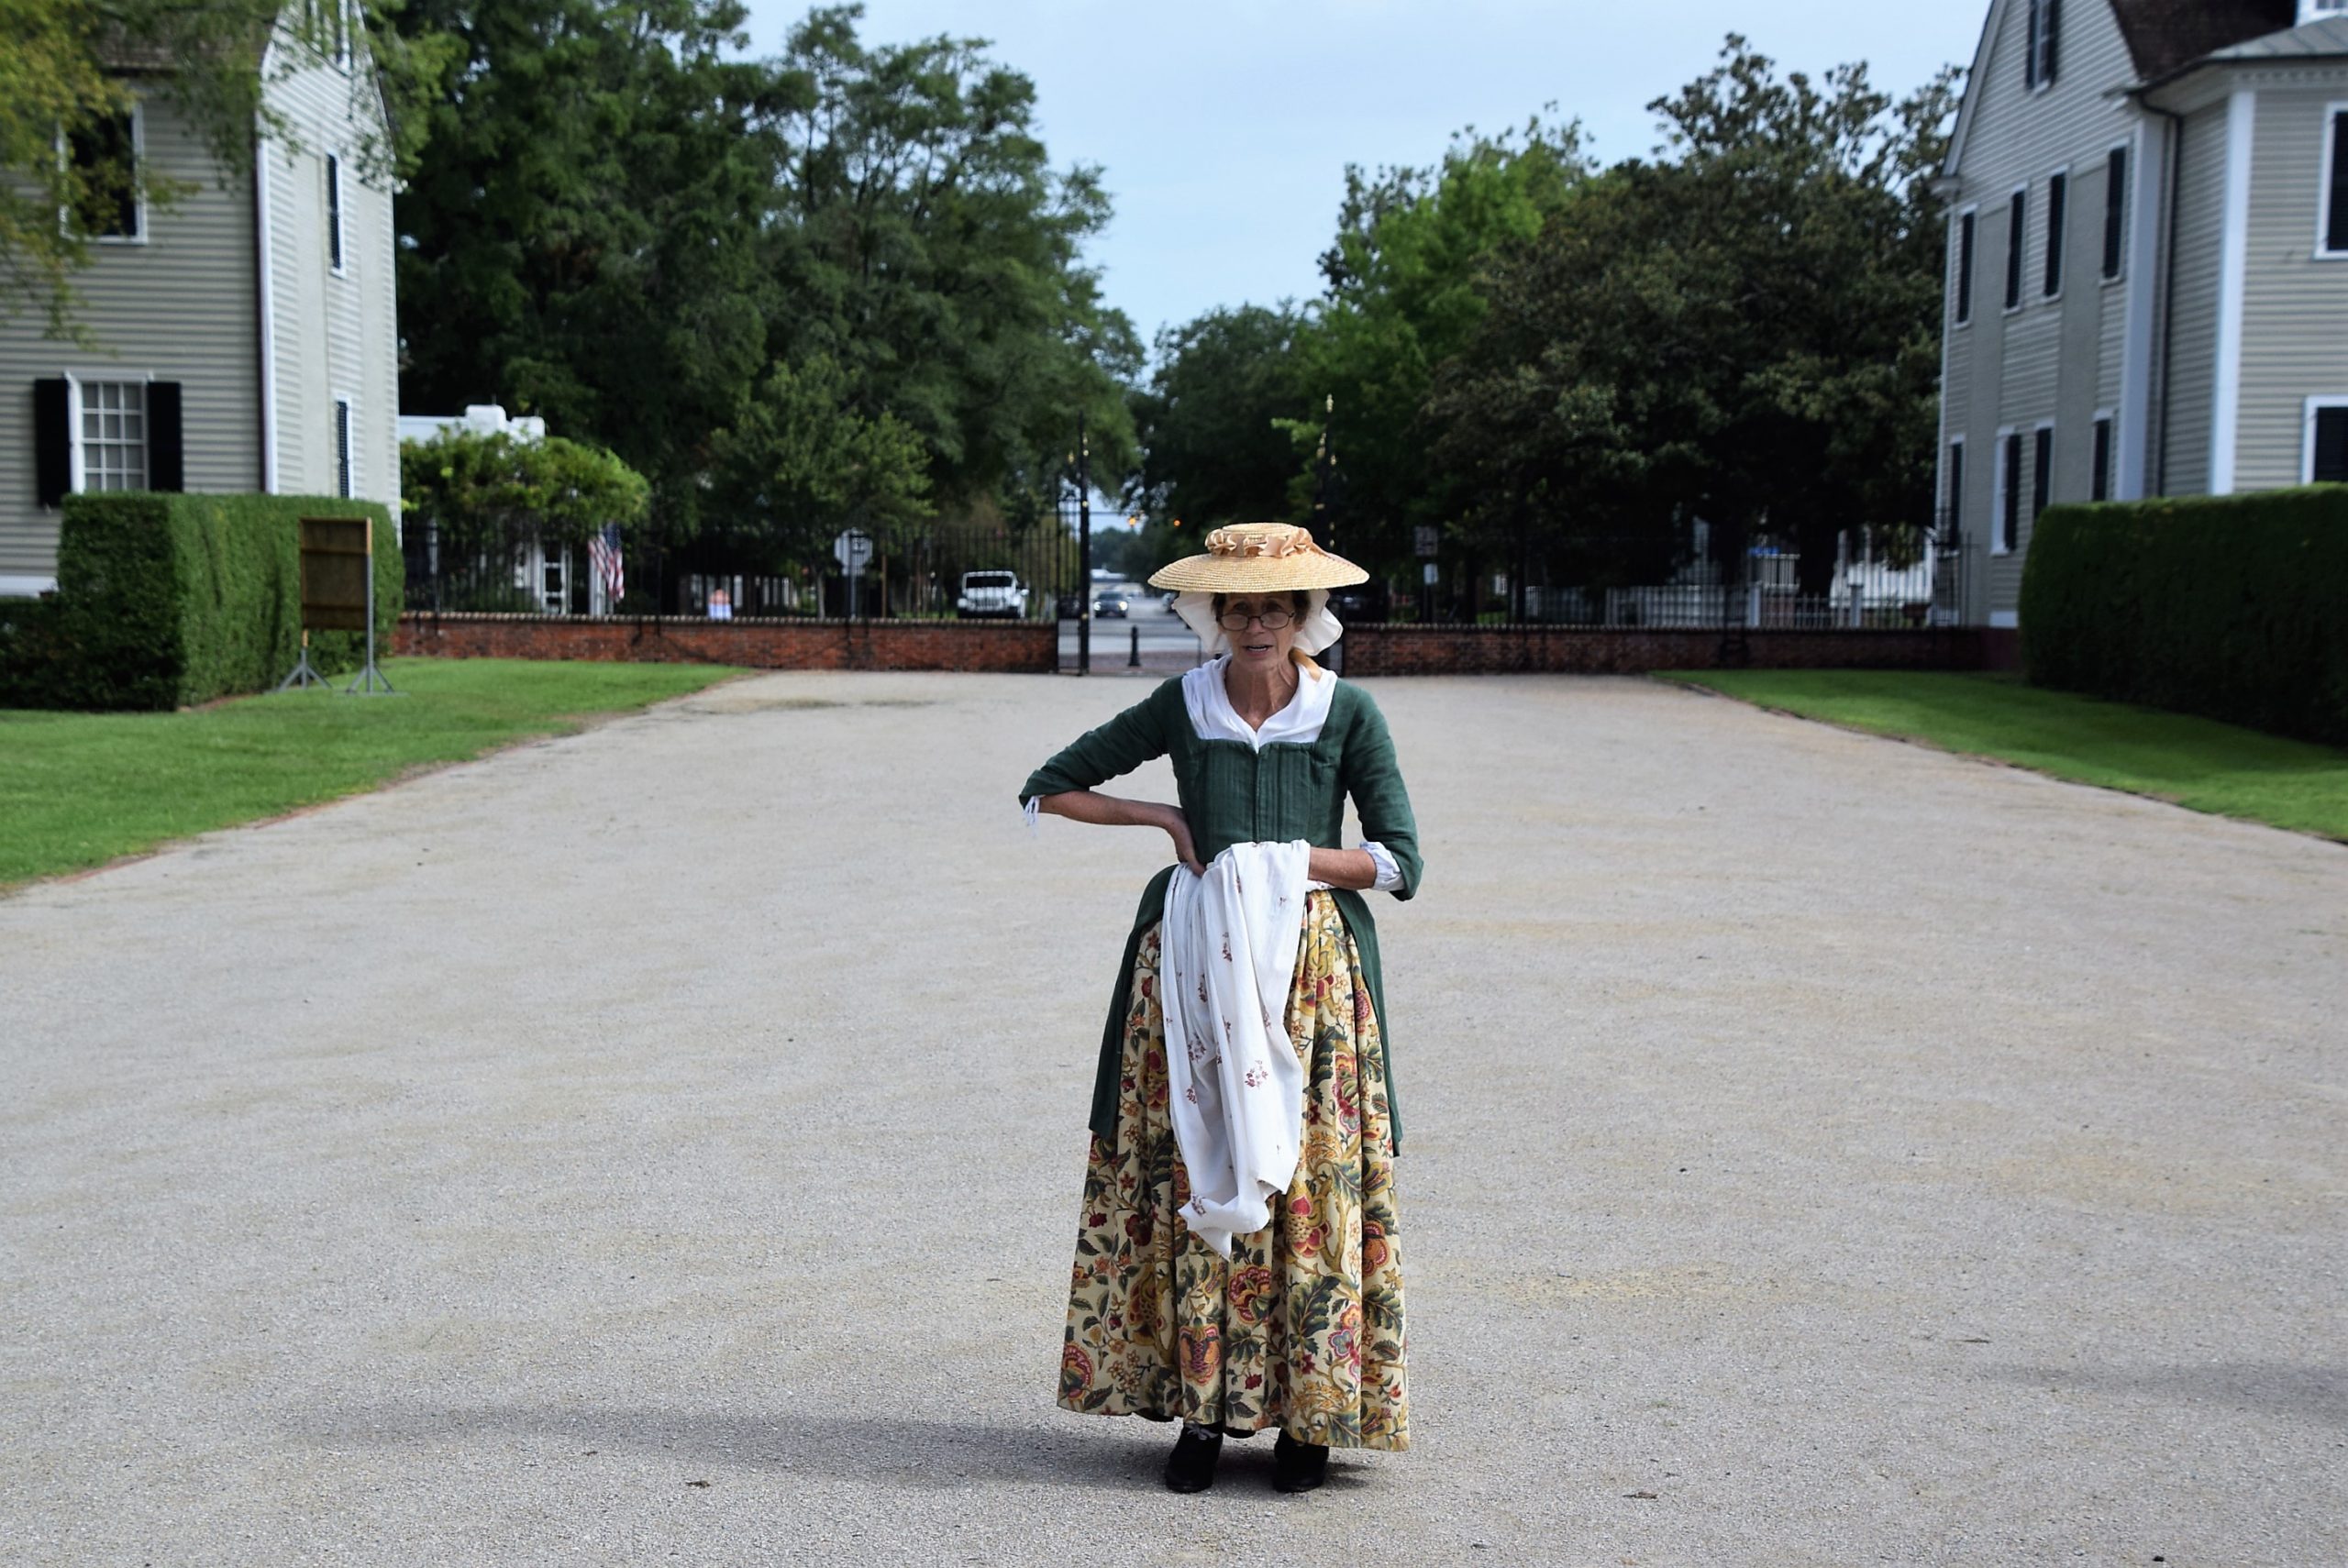 Outlander takes liberties with history of Fayetteville